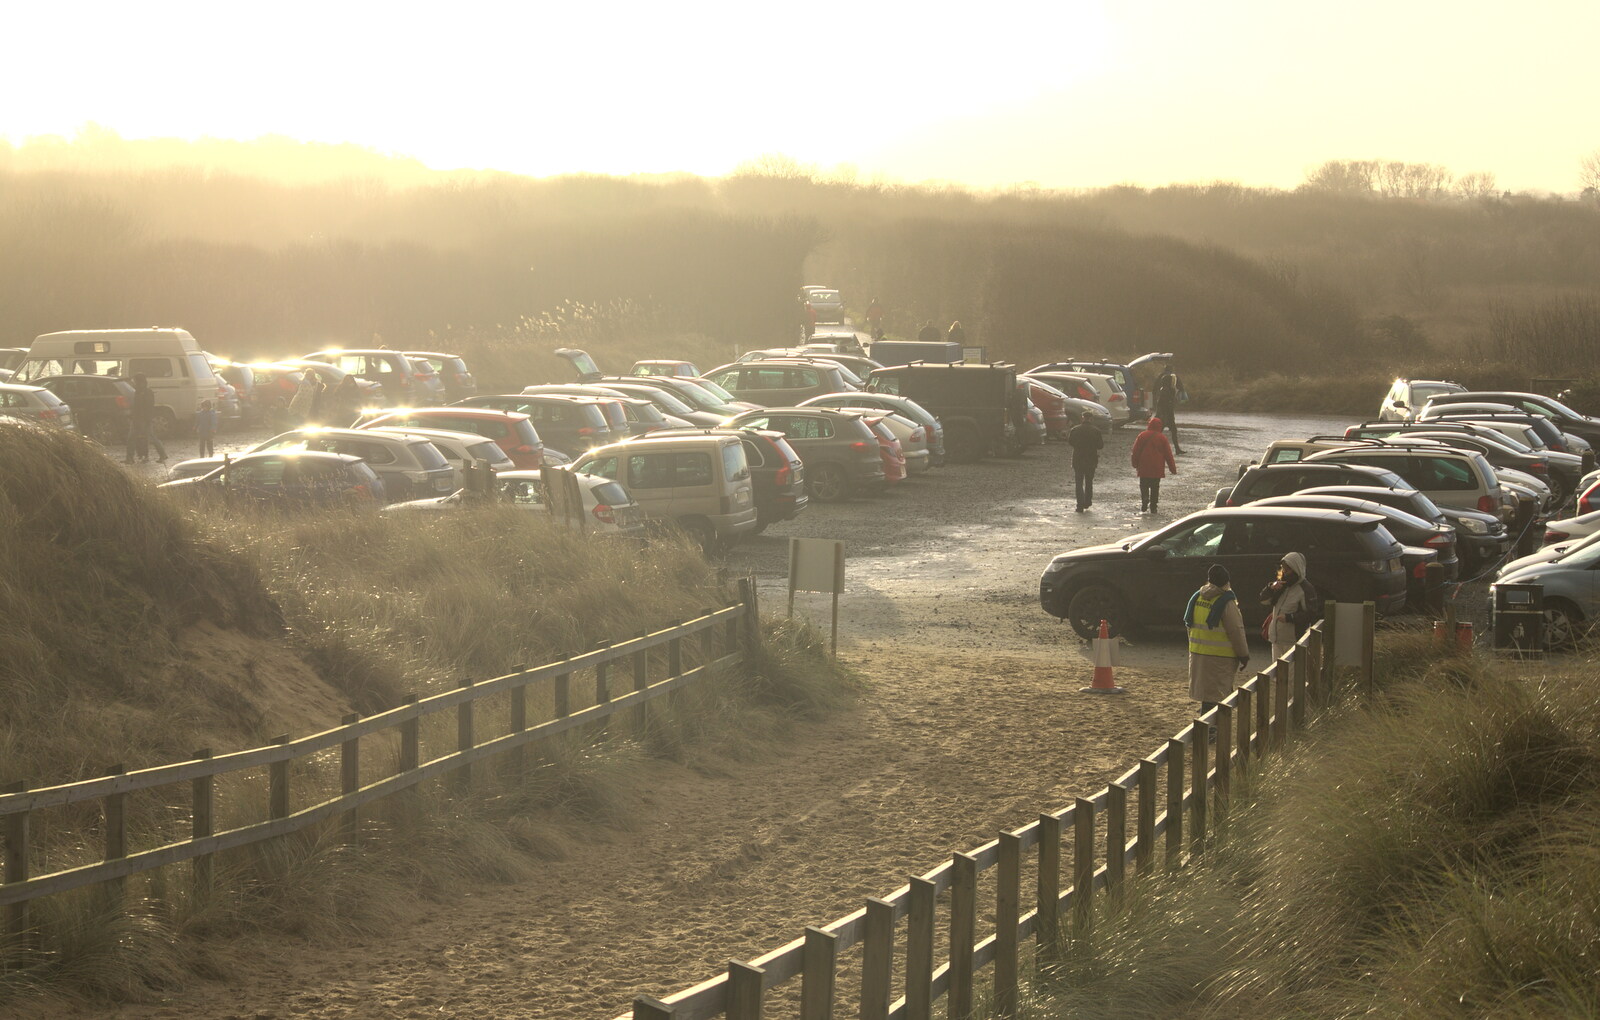 The car park is packed from Horsey Seals and Sea Palling, Norfolk Coast - 2nd January 2017